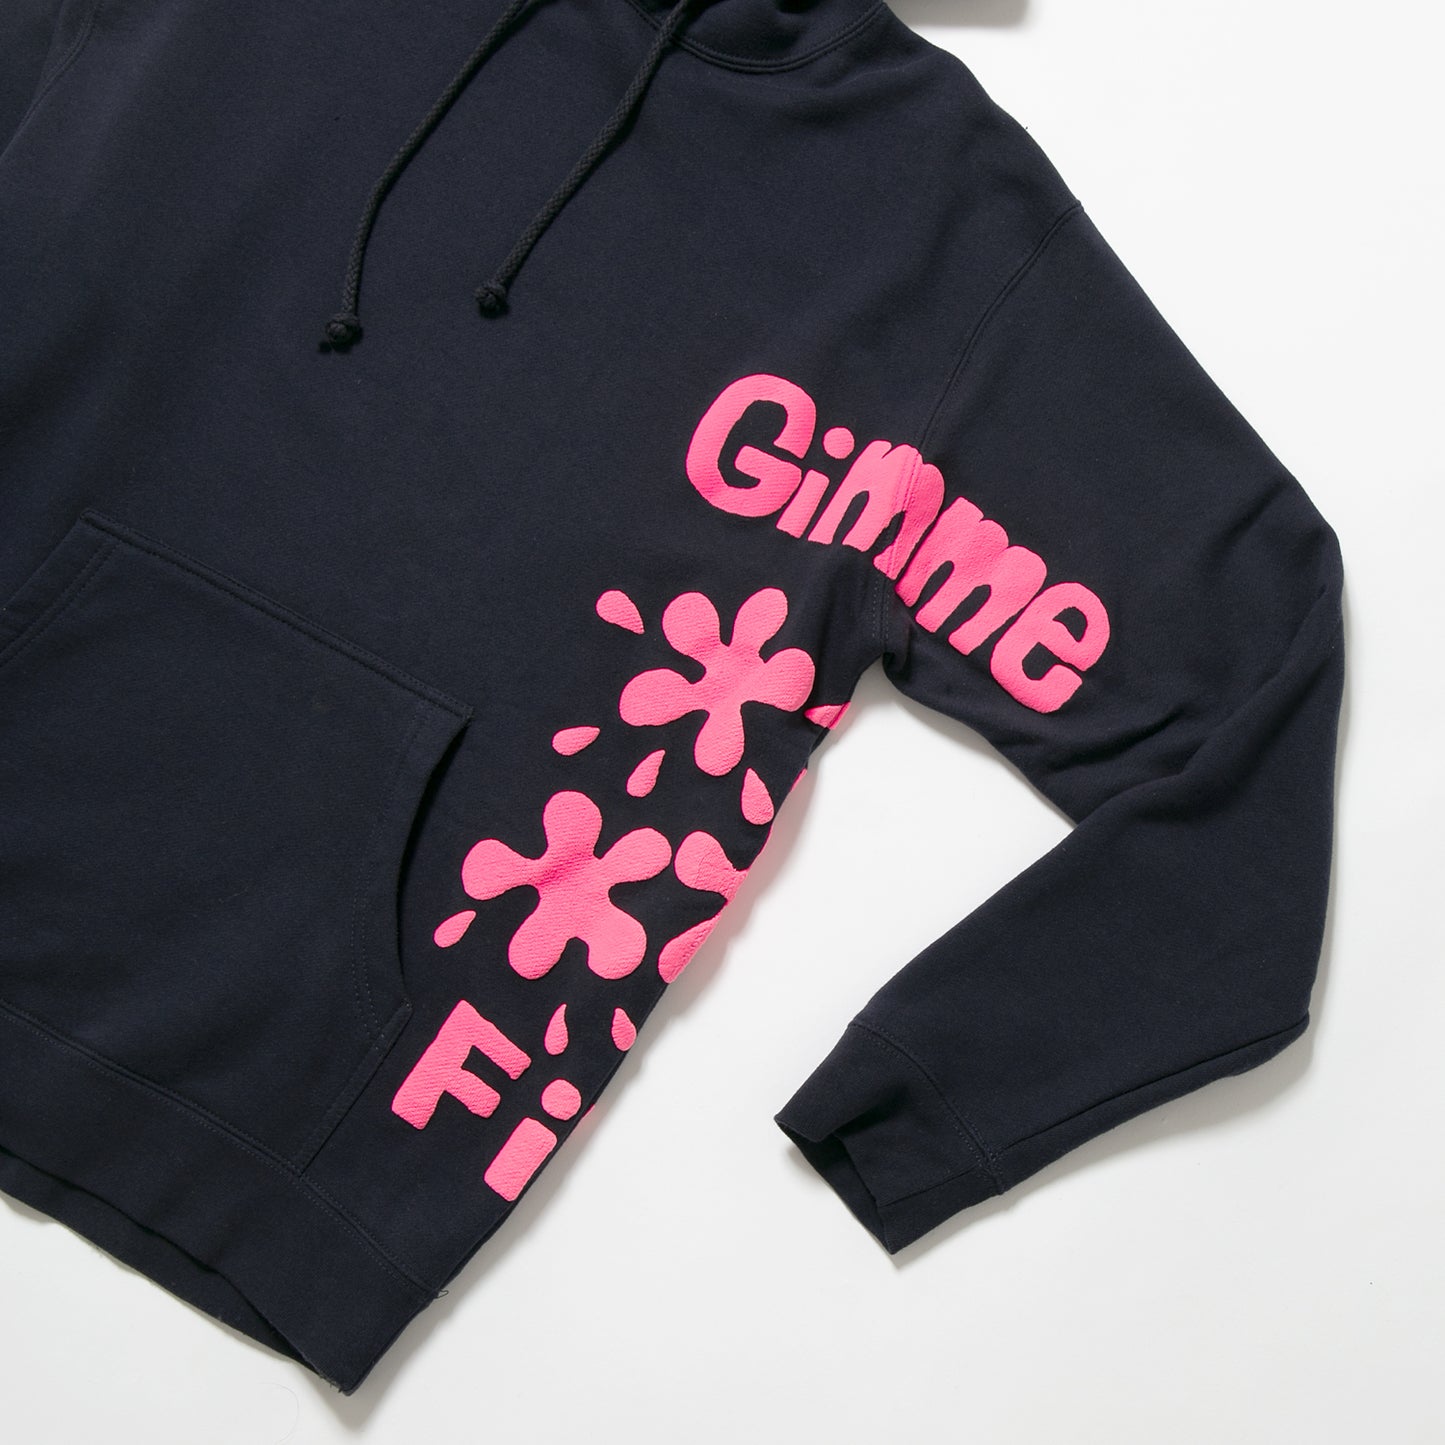 Gimme Five x Tim Comix Stains Hoodie